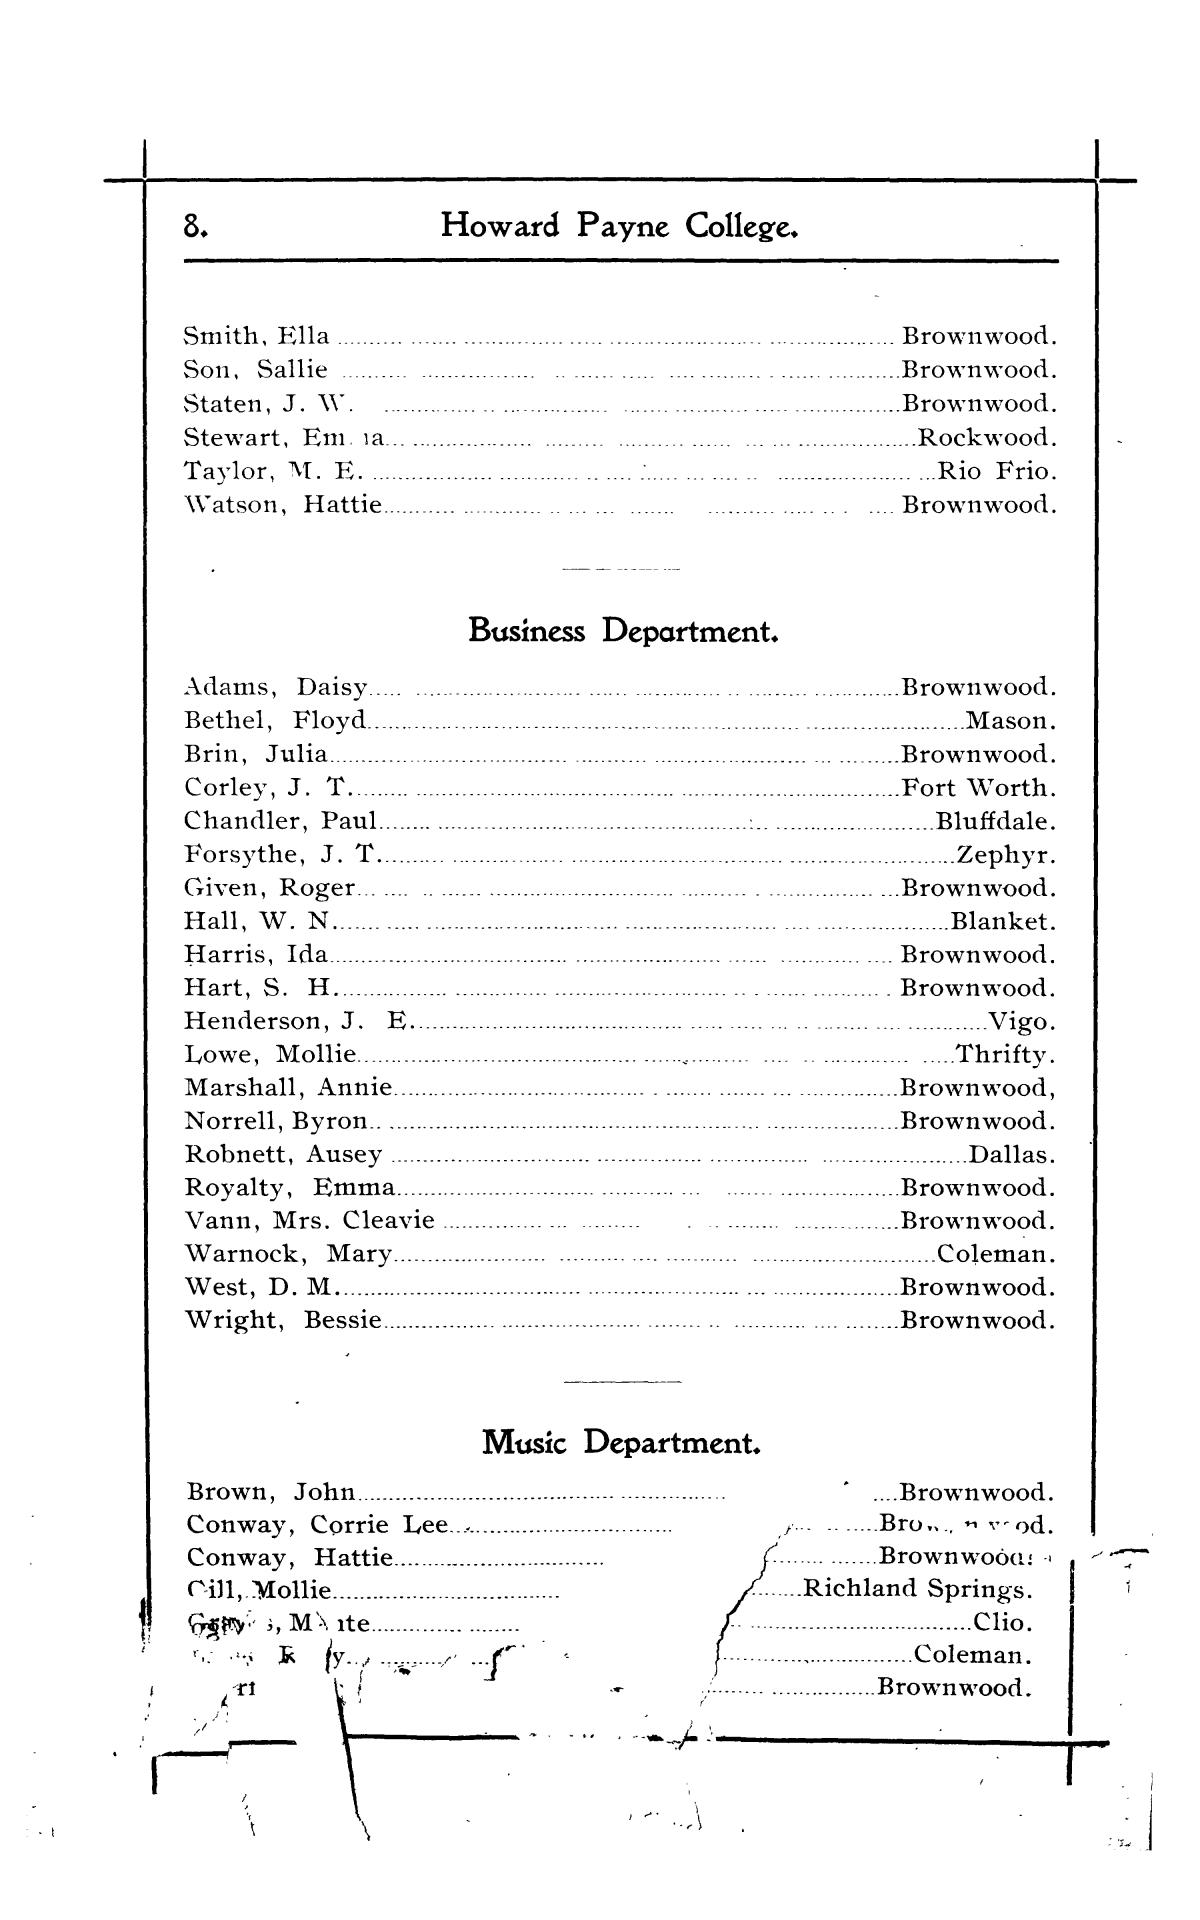 Catalogue of Howard Payne College, 1897-1898
                                                
                                                    8
                                                